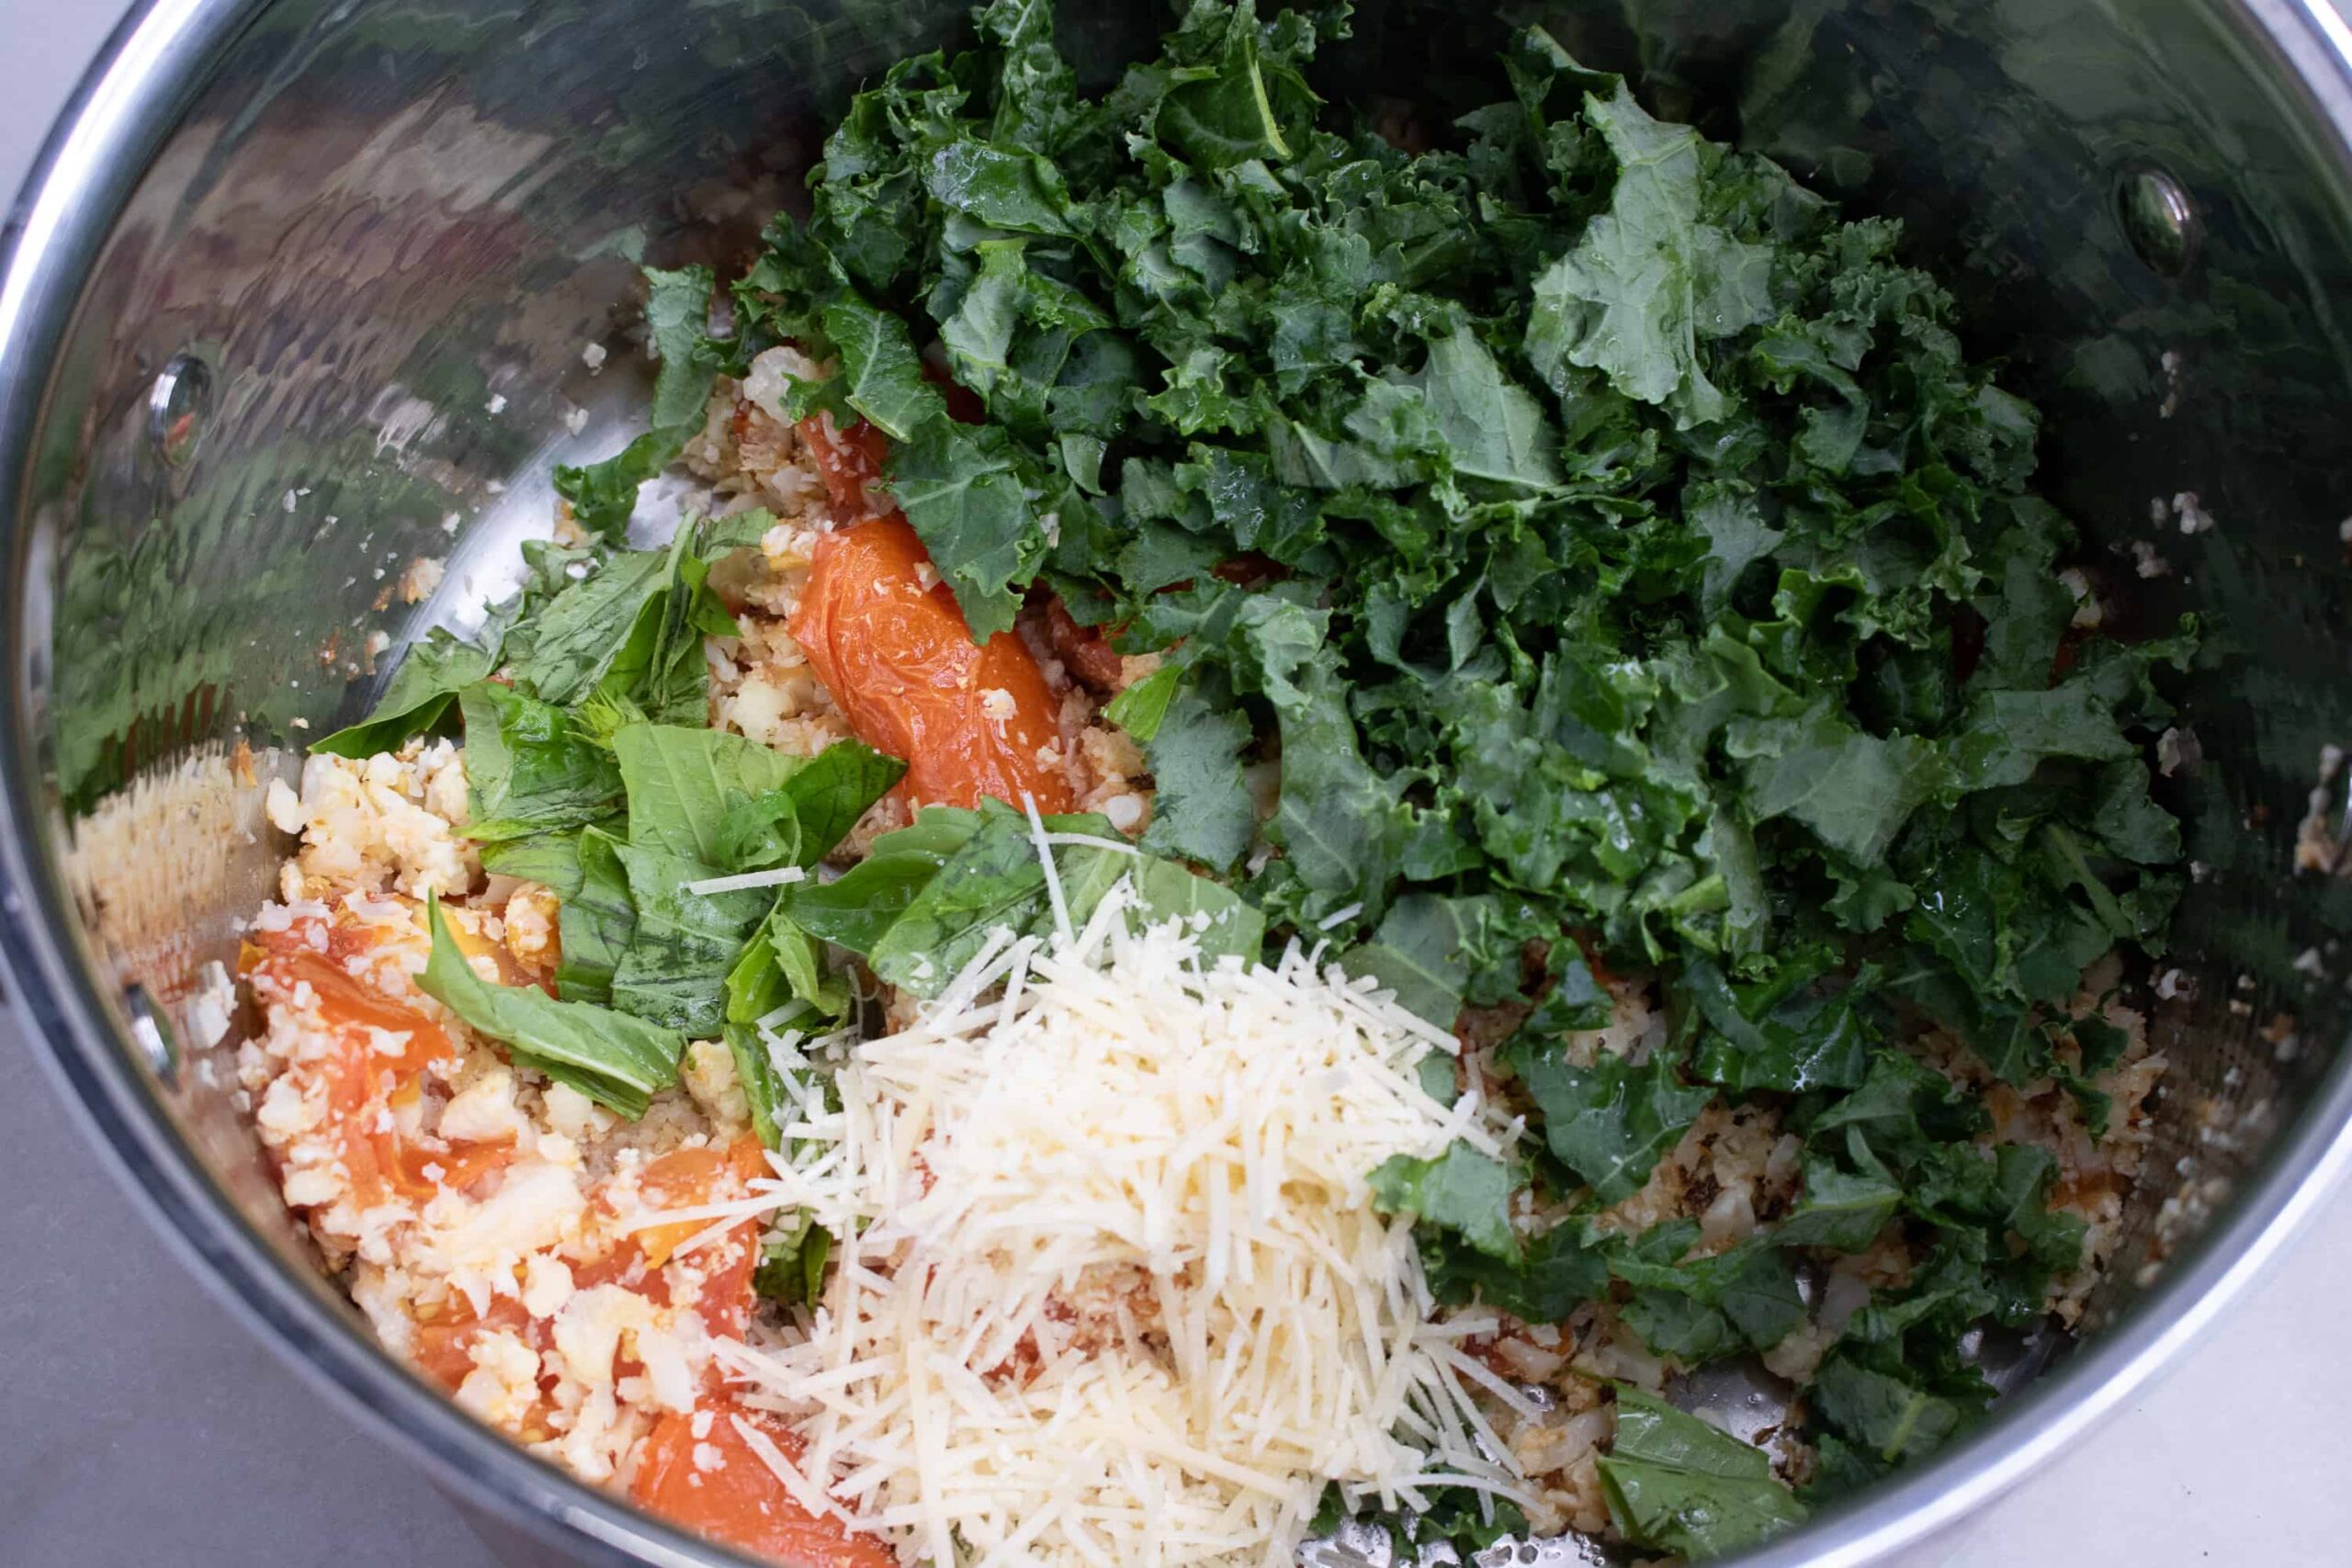 Roasted cauliflower rice, roasted tomatoes, chopped kale, shredded parmesan and fresh basil in a pot